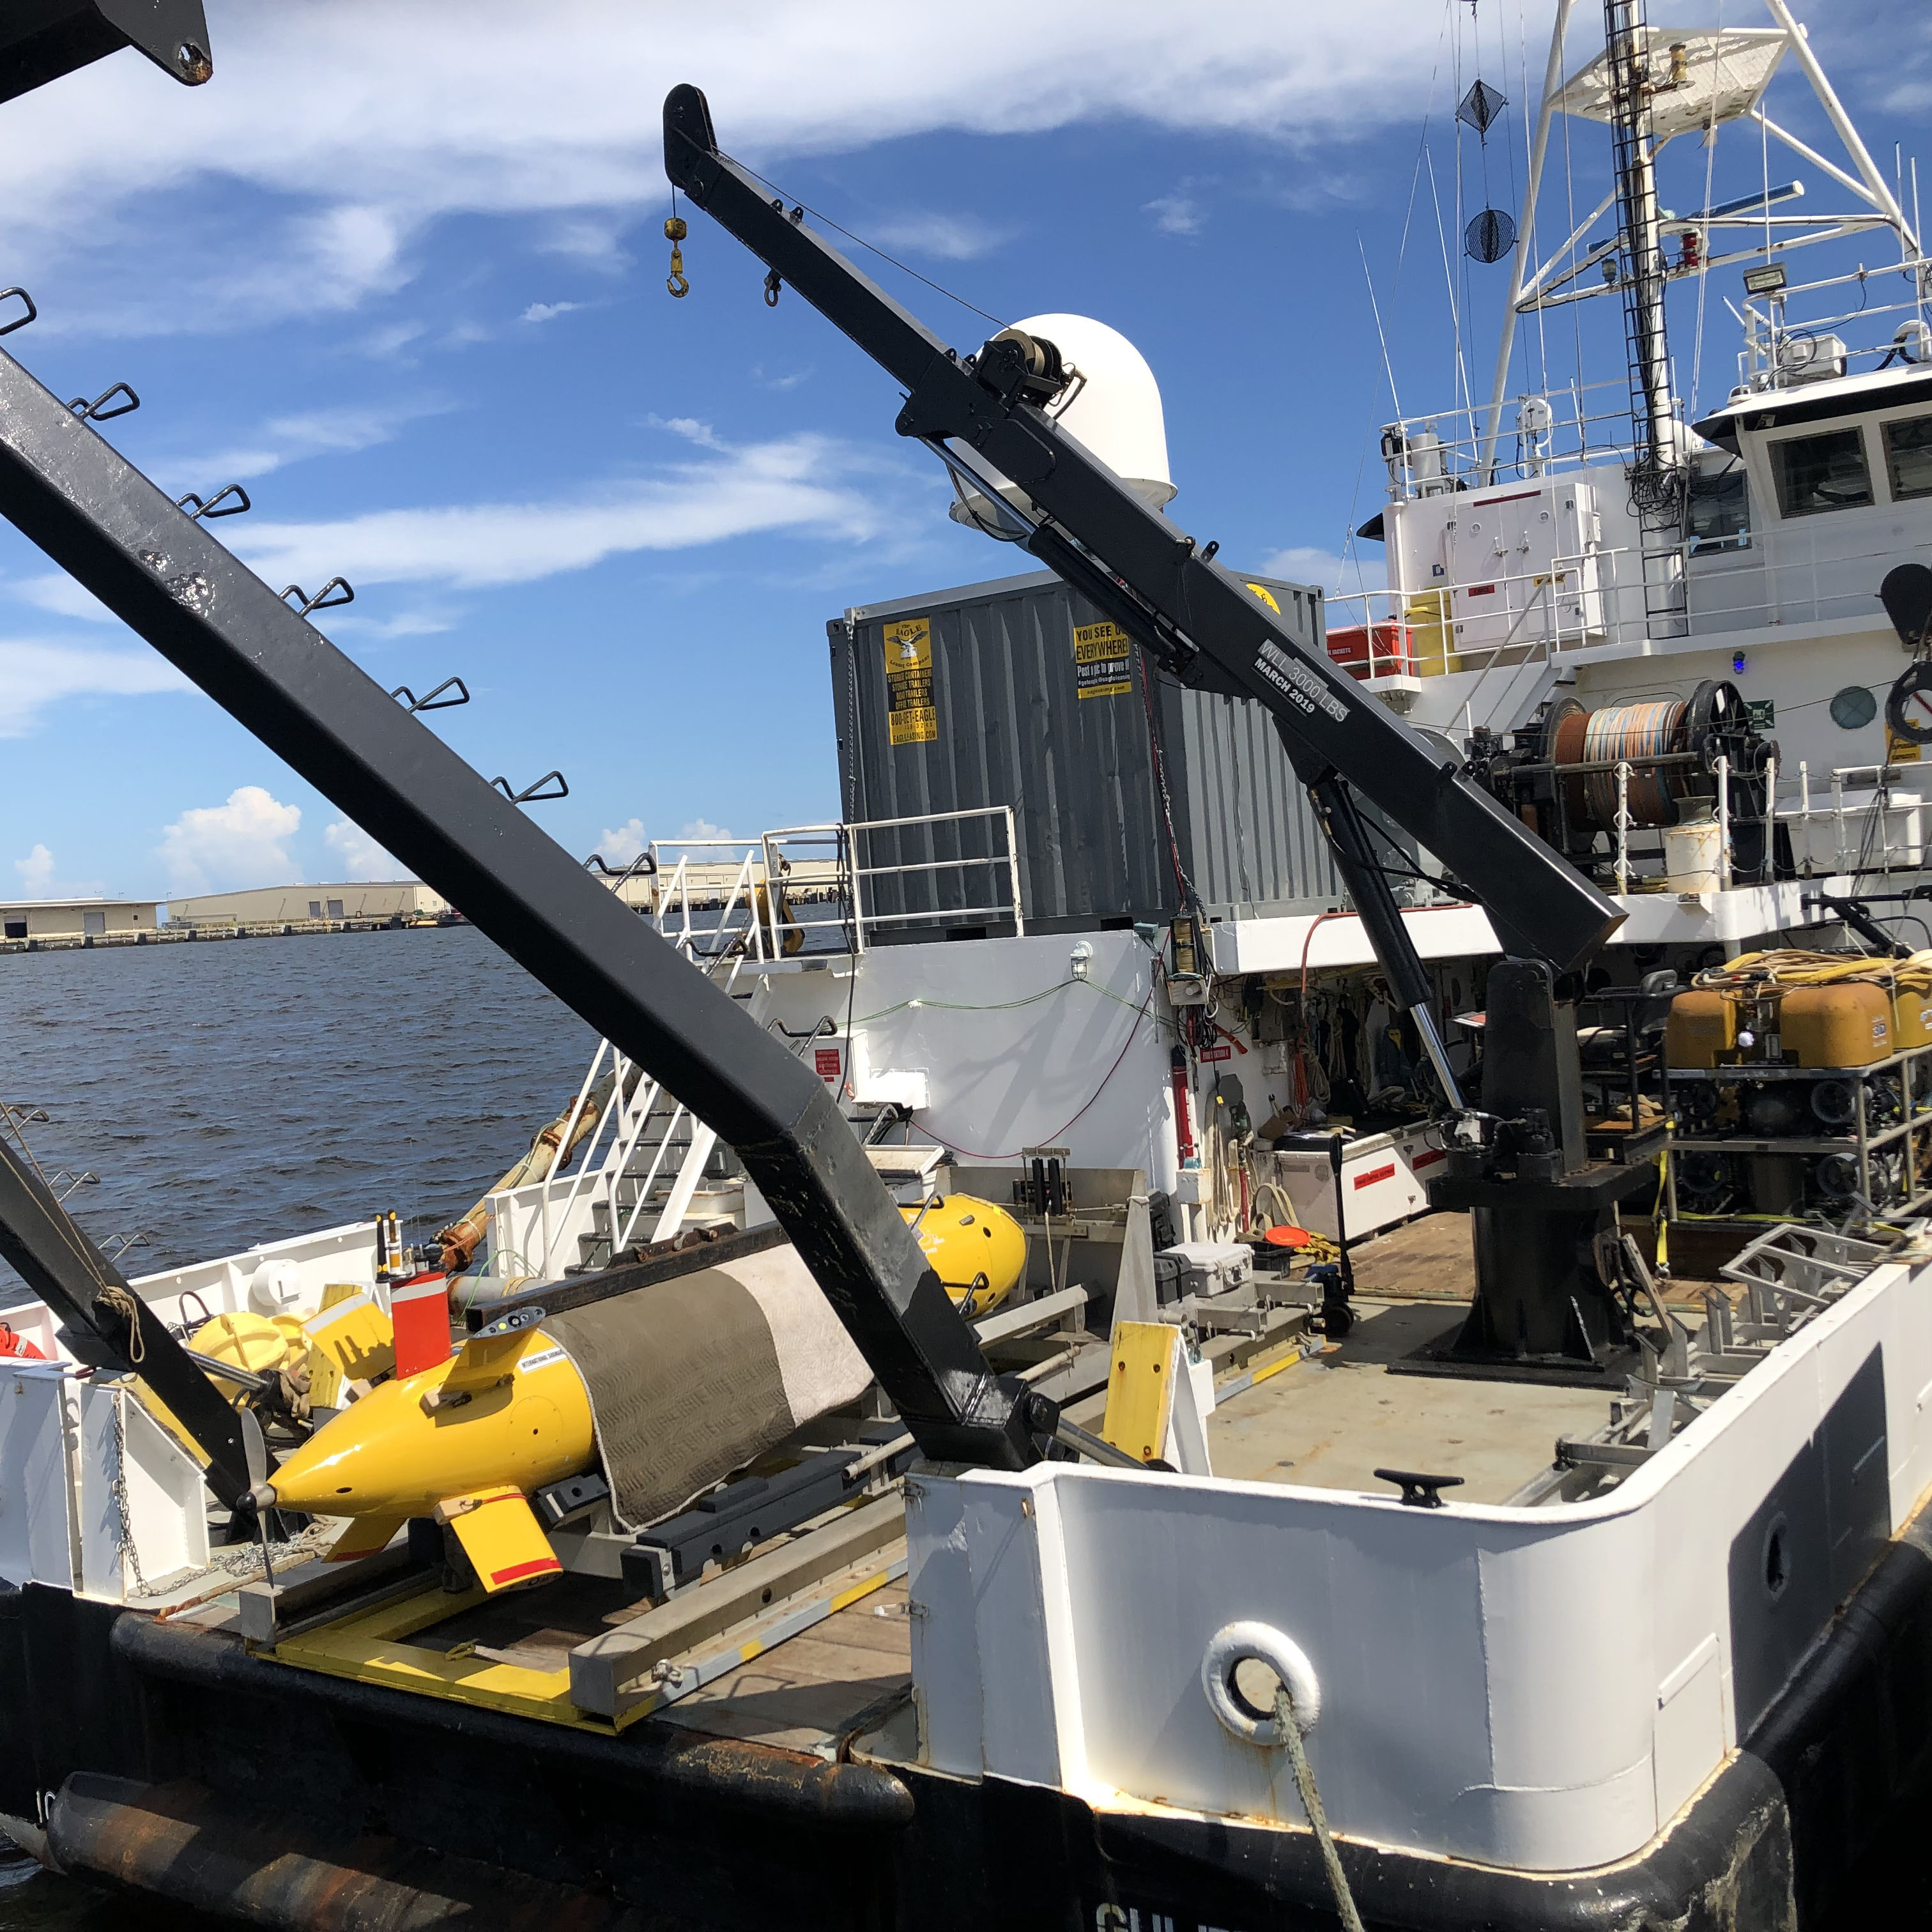 Autonomous underwater vehicle Eagle Ray on the back deck of the University of Southern Mississippi’s Research Vessel Point Sur during the August 2021 search for SS Norlindo. During the January-February search, the team will once again deploy Eagle Ray to collect bathymetry and backscatter data to identify potential targets to later explore using a remotely operated vehicle.